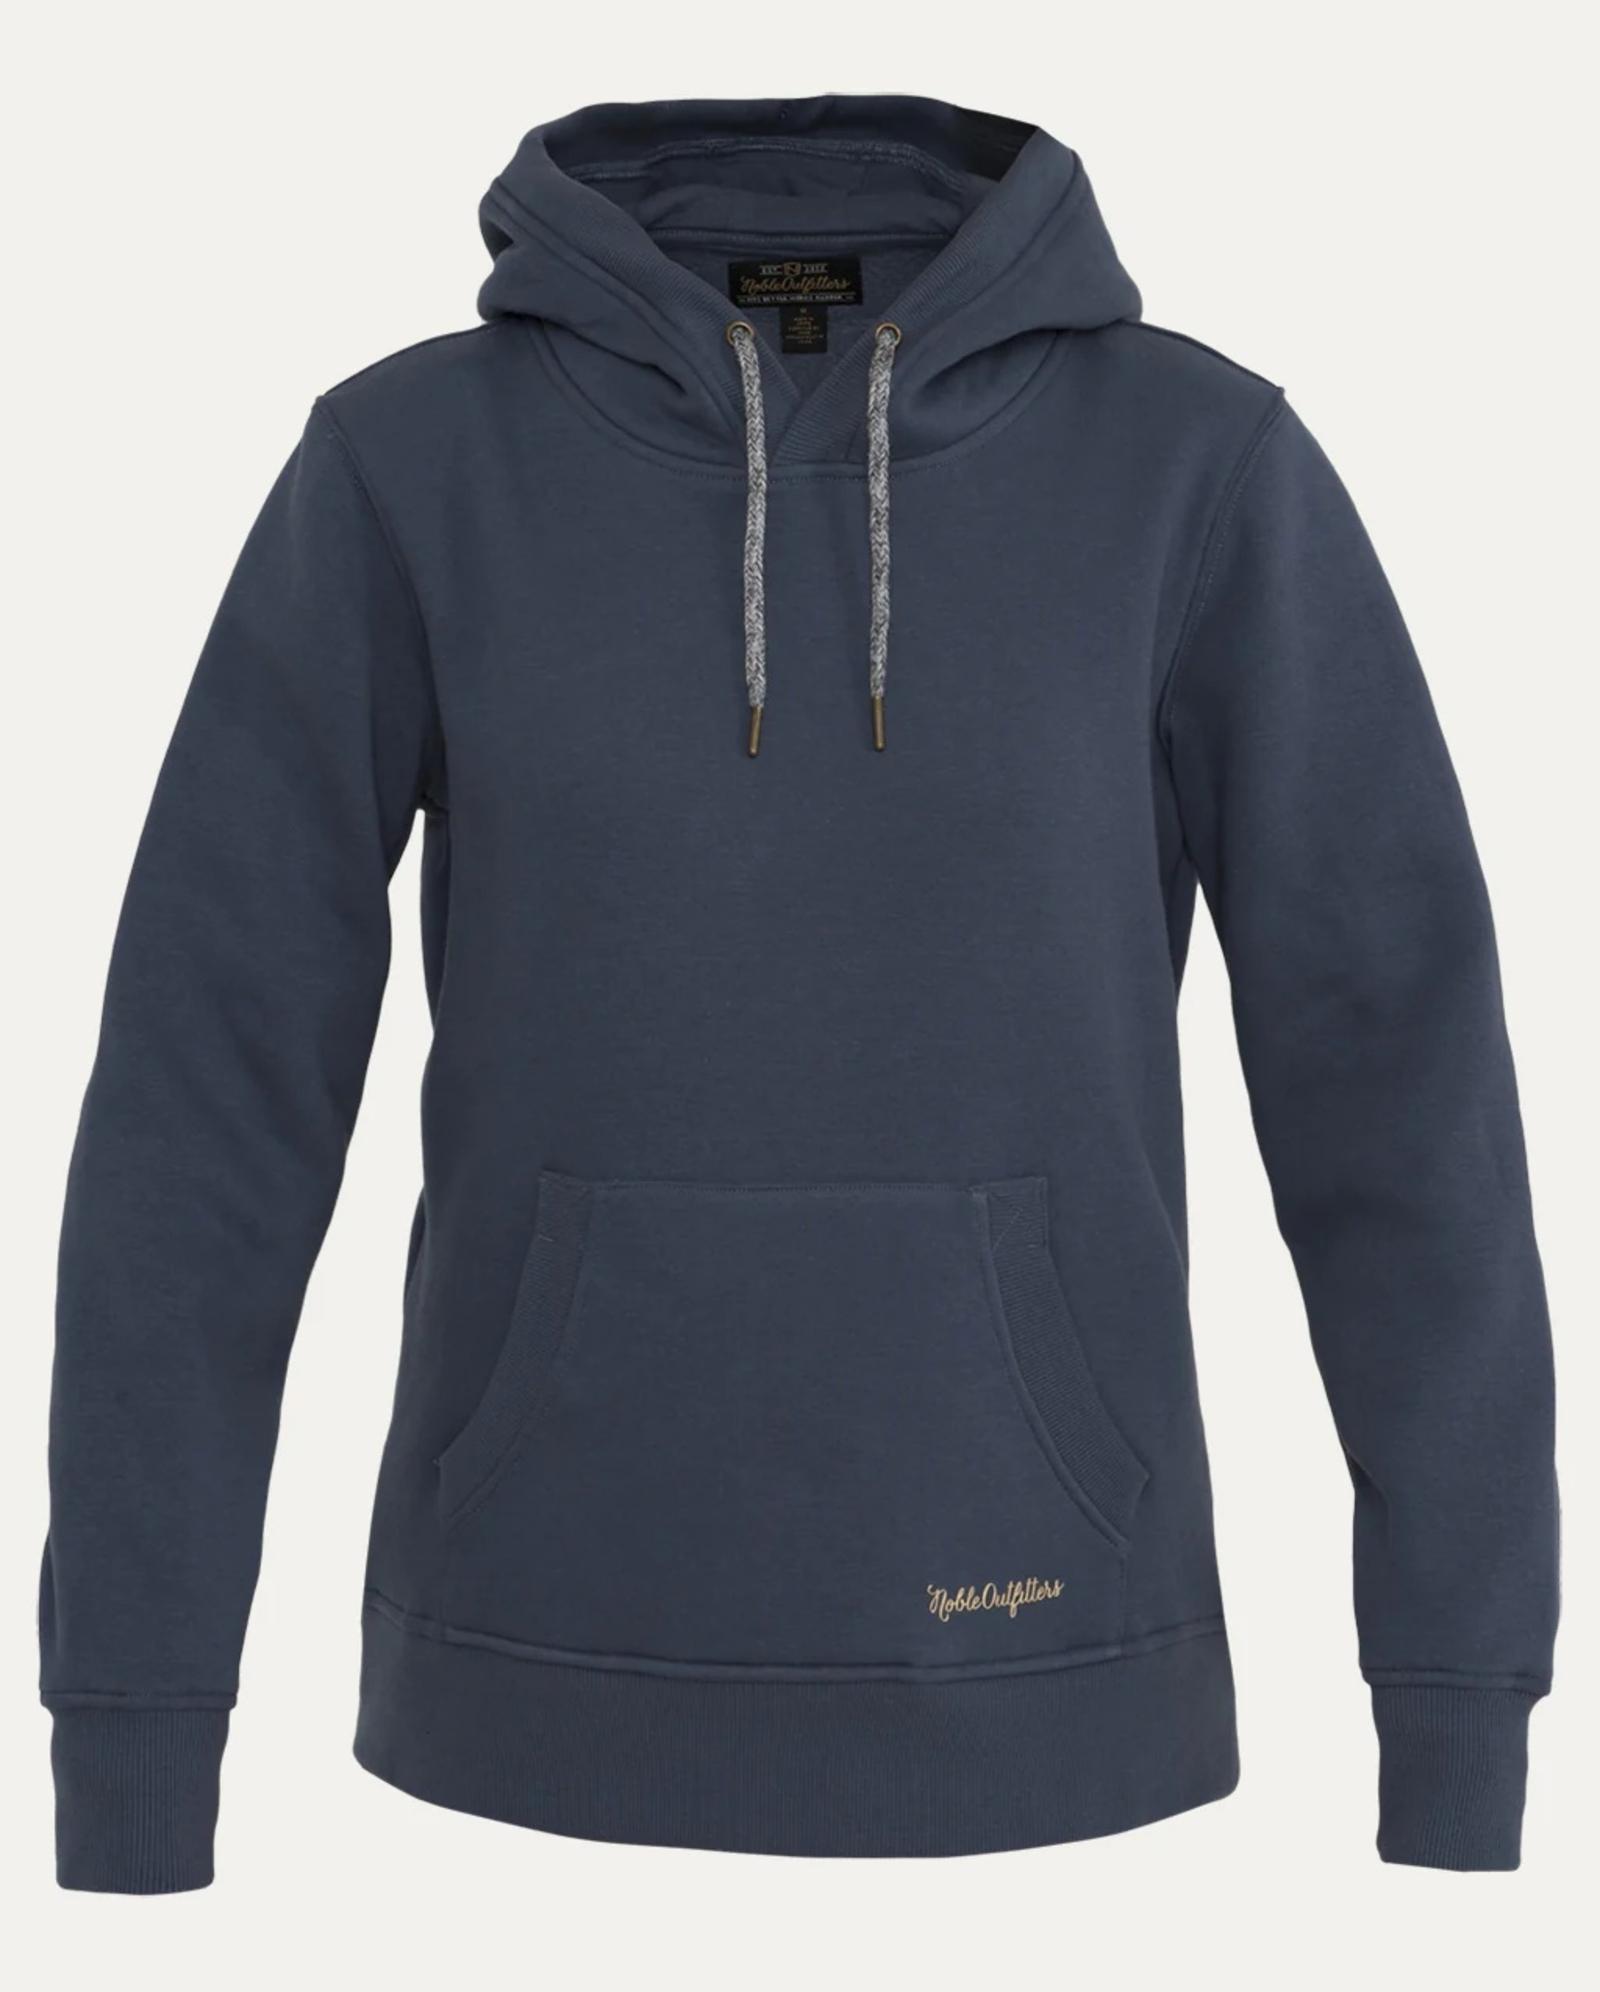  Noble Outfitters Women's Flex Pullover Hoodie